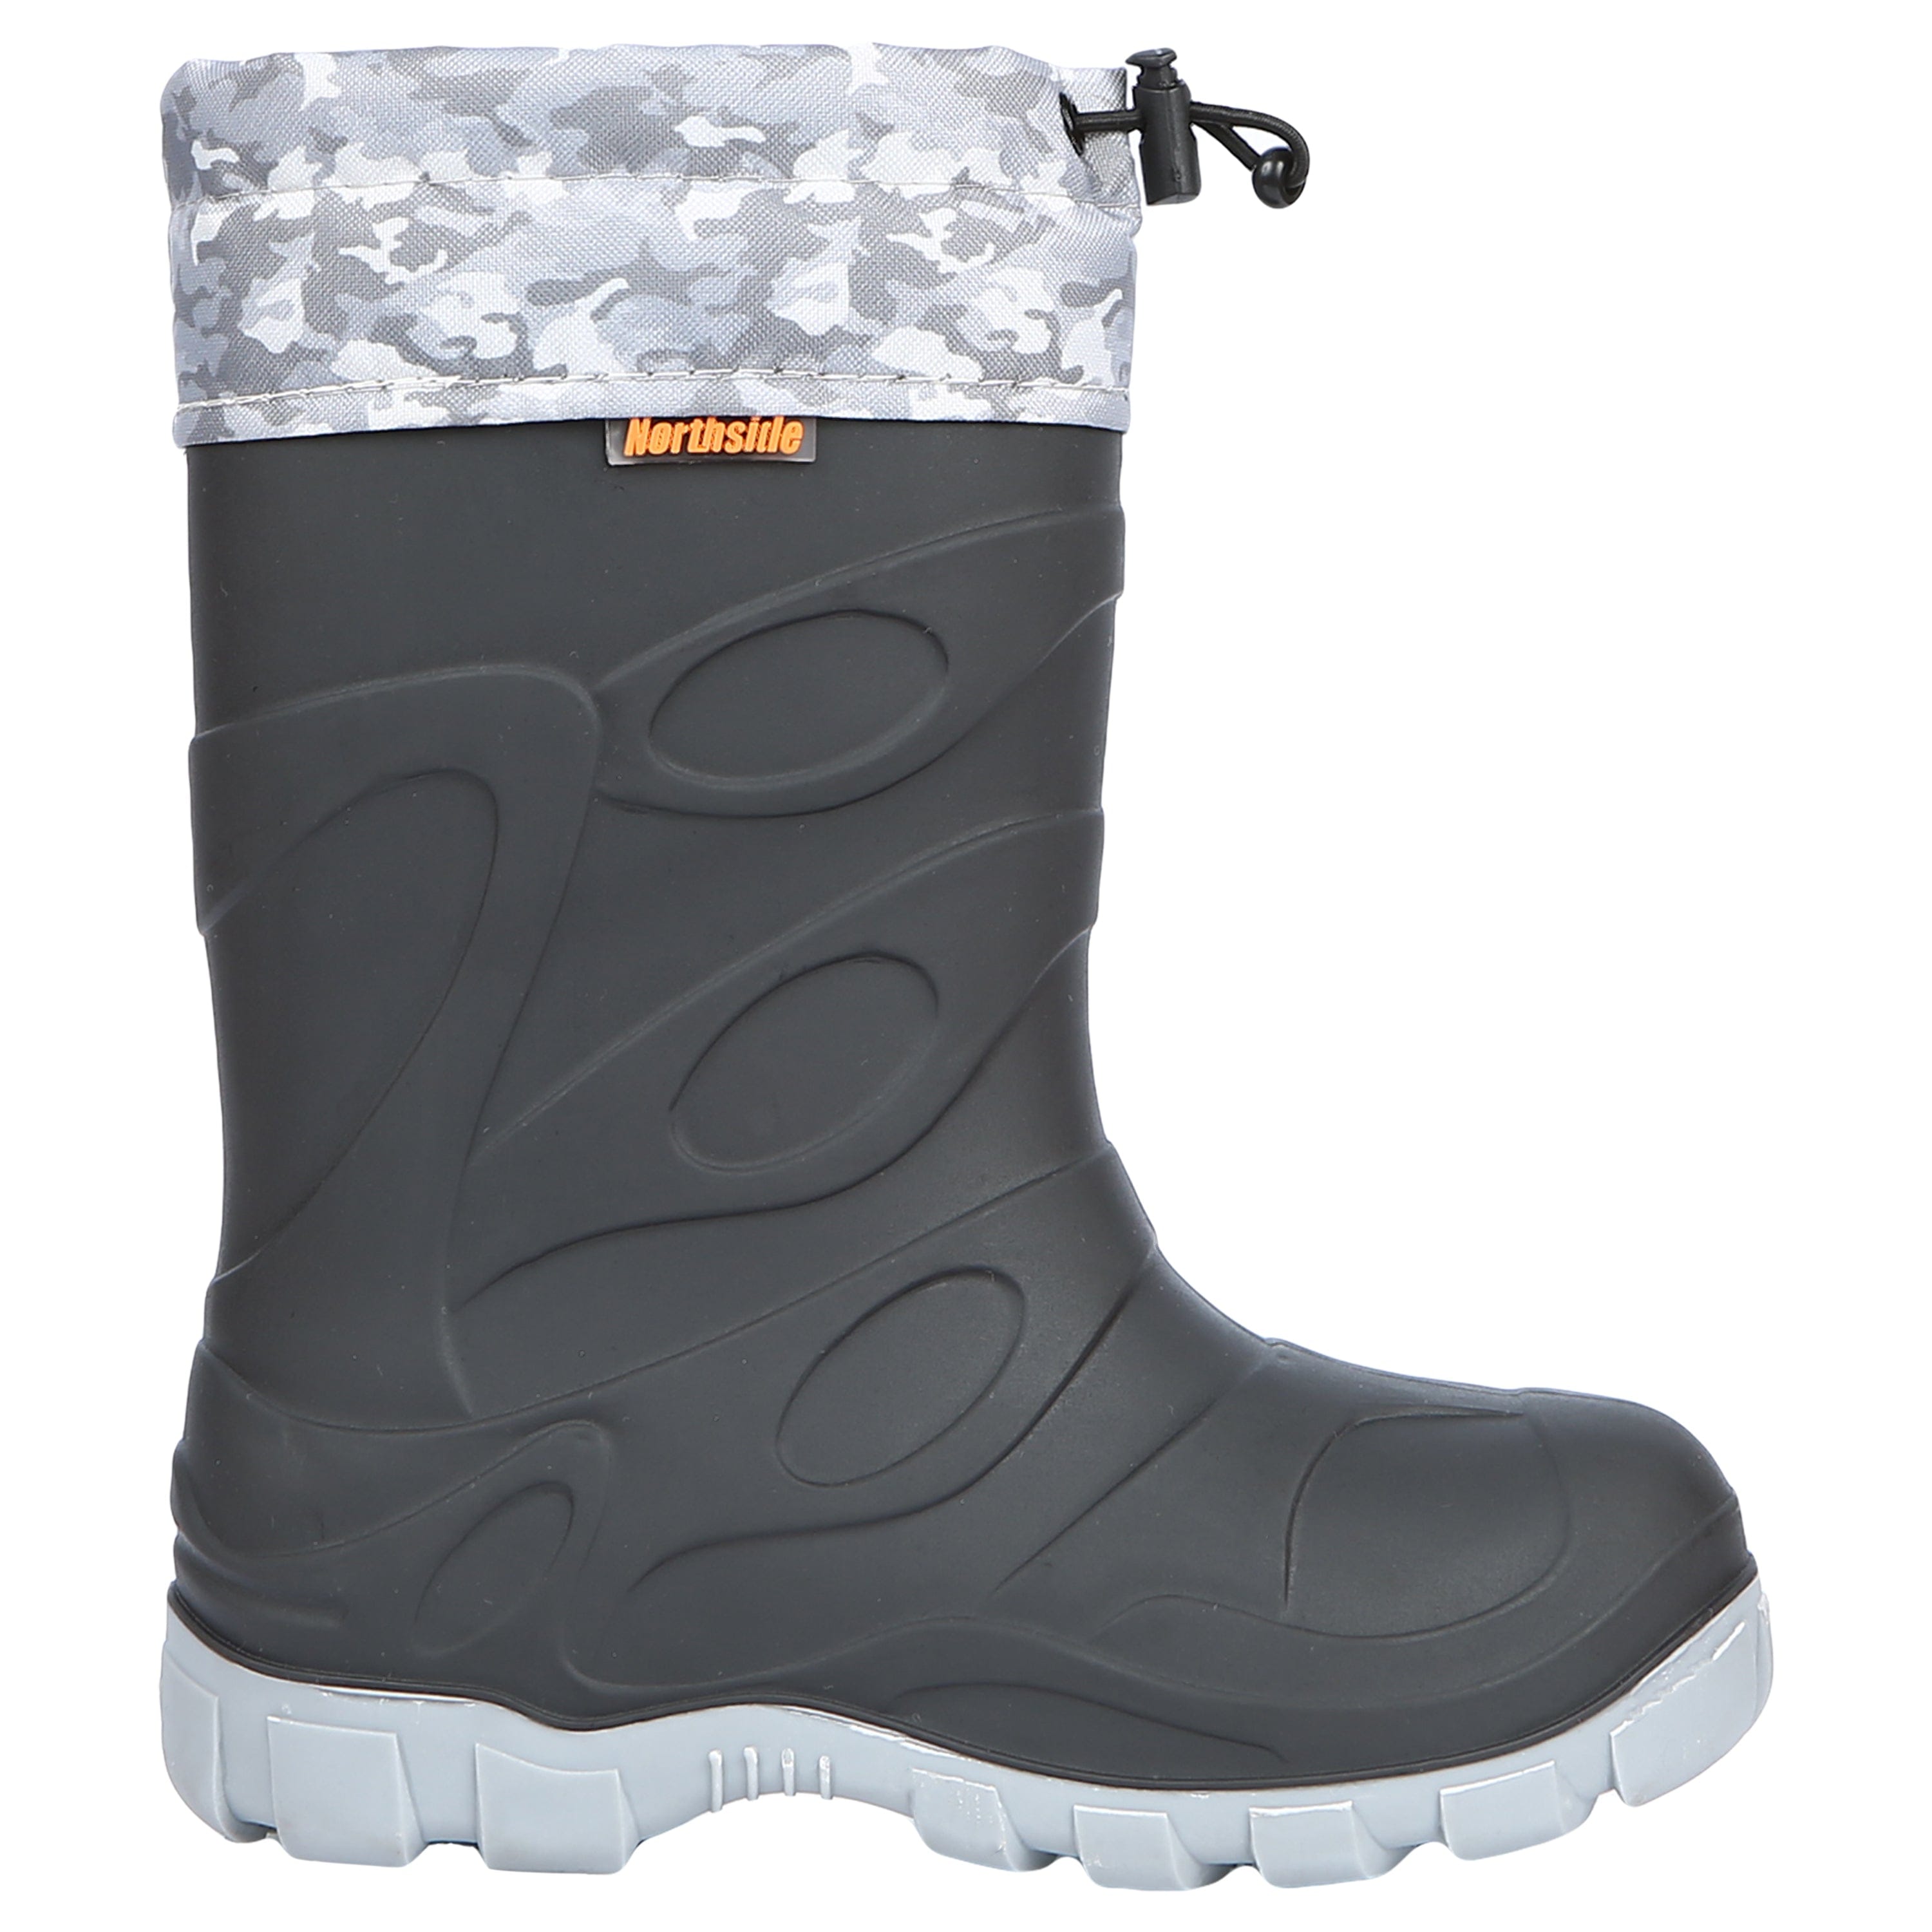 Kid's Orion Waterproof Insulated Rubber winter Boot - Northside USA